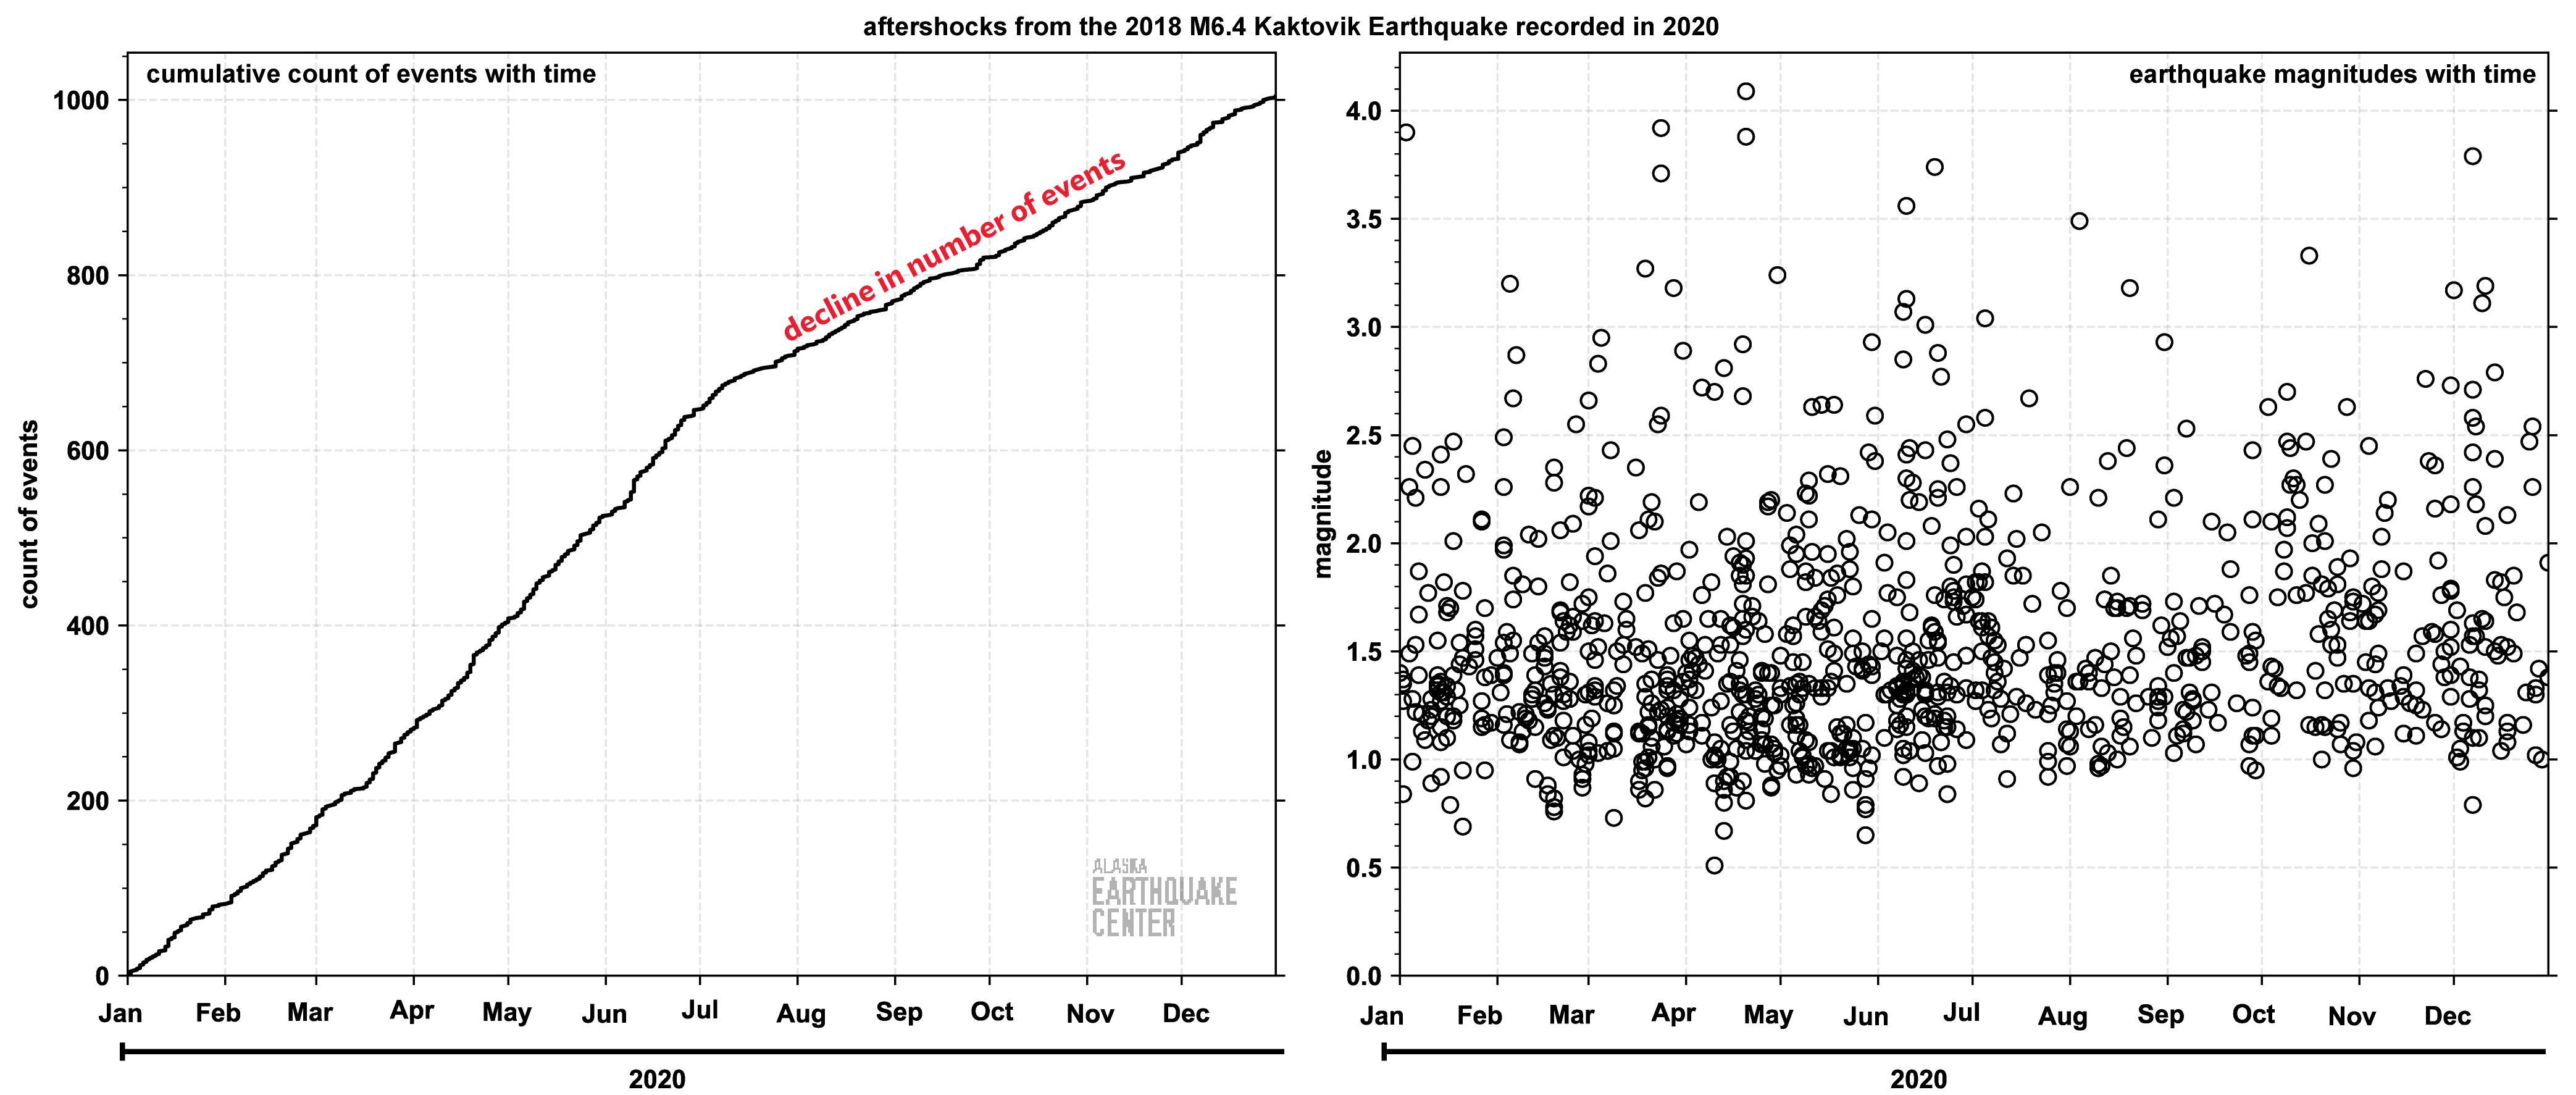 (L) The cumulative number of earthquakes in the 2018 M6.4 Kaktovik Earthquake region in 2020. (R) The magnitudes of the each earthquake in the sequence plotted in time.